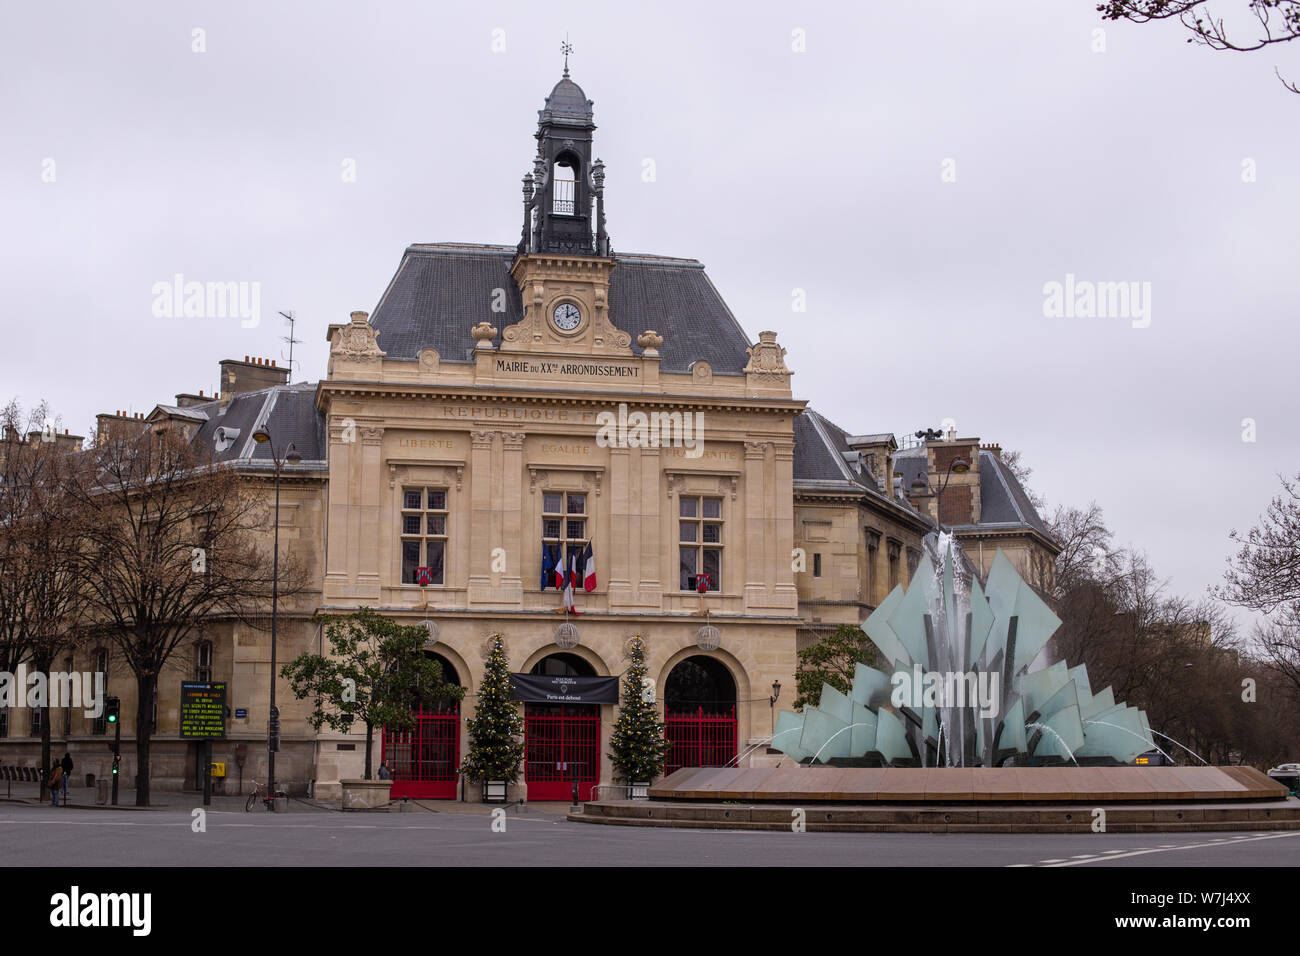 Paris, France - January 01, 2016: cityscape of the Gambetta square with its monument and the town Hall (Mairie du XXeme) building Stock Photo